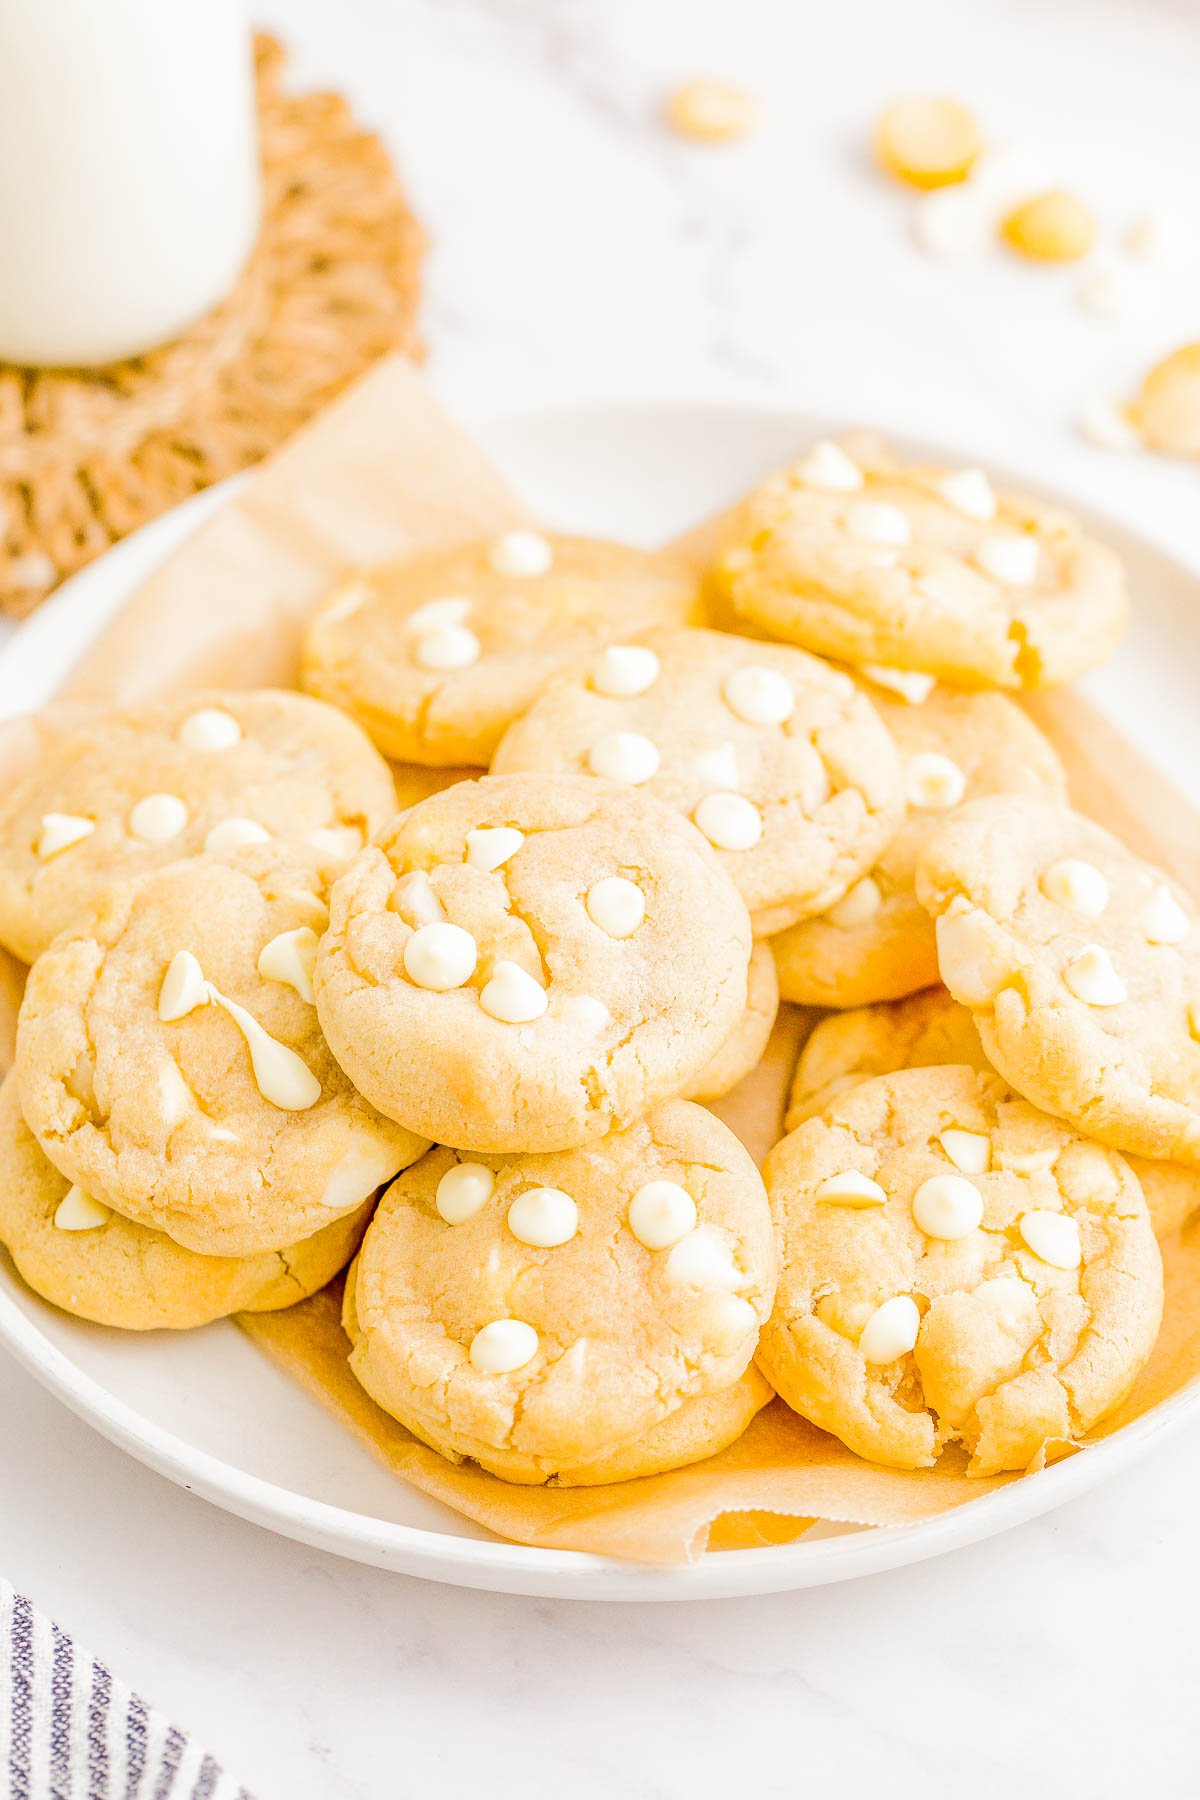 White Chocolate Macadamia Nut Cookies - These EASY white chocolate and macadamia nut cookies are the perfect combination of sweet, nutty, soft and chewy perfection! They're loaded with creamy white chocolate chips and crispy chunks of macadamia nuts and baked until slightly crisp on the outside with a perfectly soft and slightly chewy center. Learn how to make these cookies that are BETTER than from a bakery! 